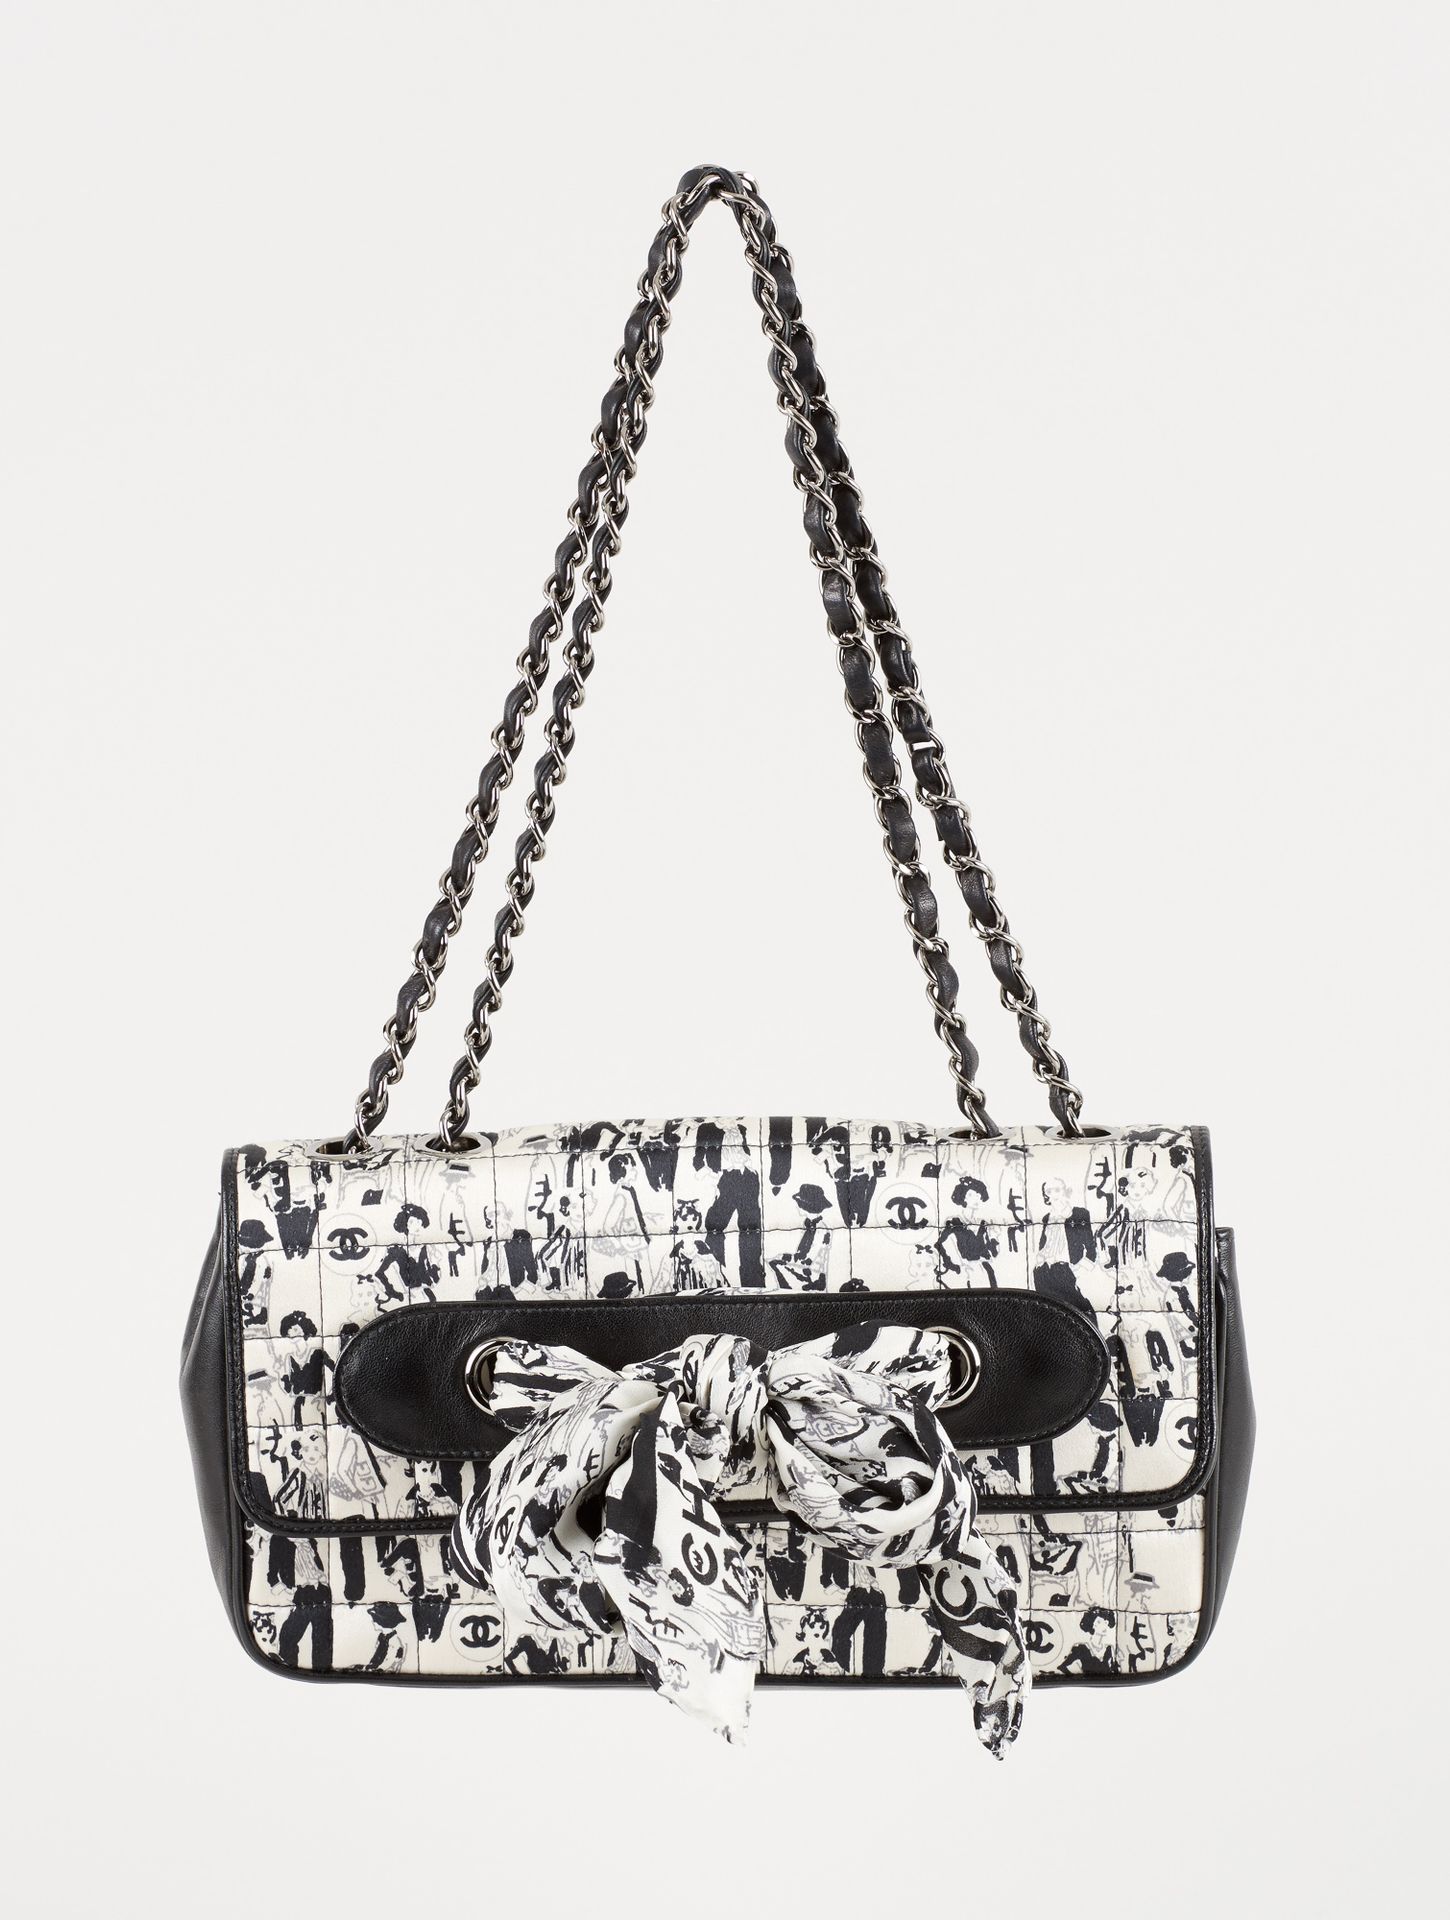 CHANEL. Leather goods: Black leather and silk handbag with young women prints.

&hellip;